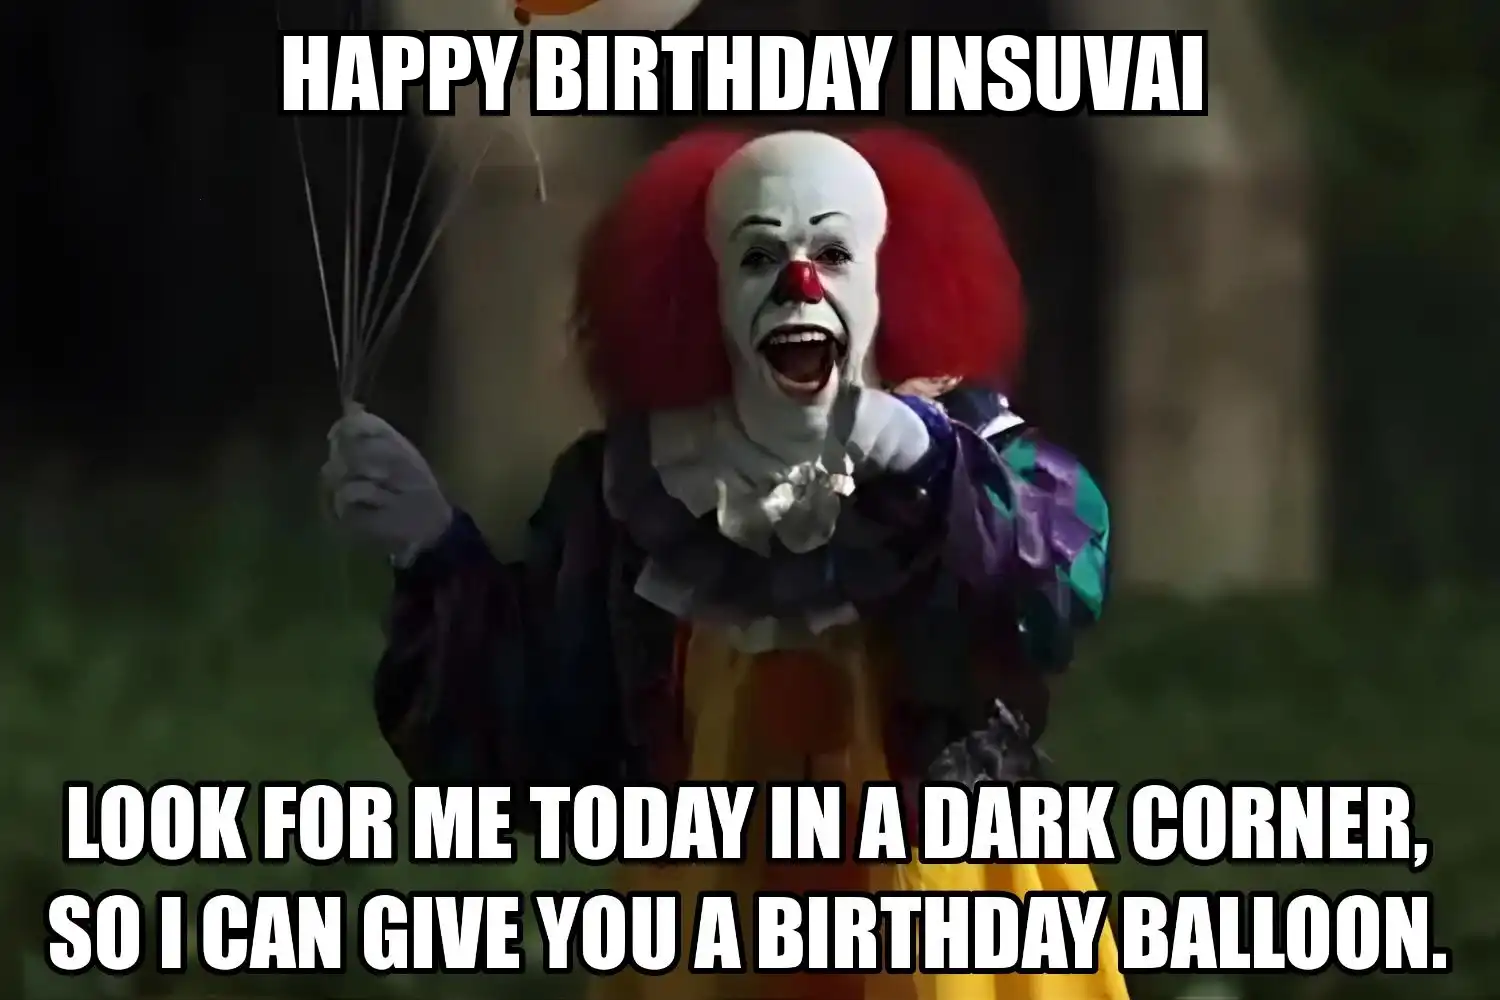 Happy Birthday Insuvai I Can Give You A Balloon Meme